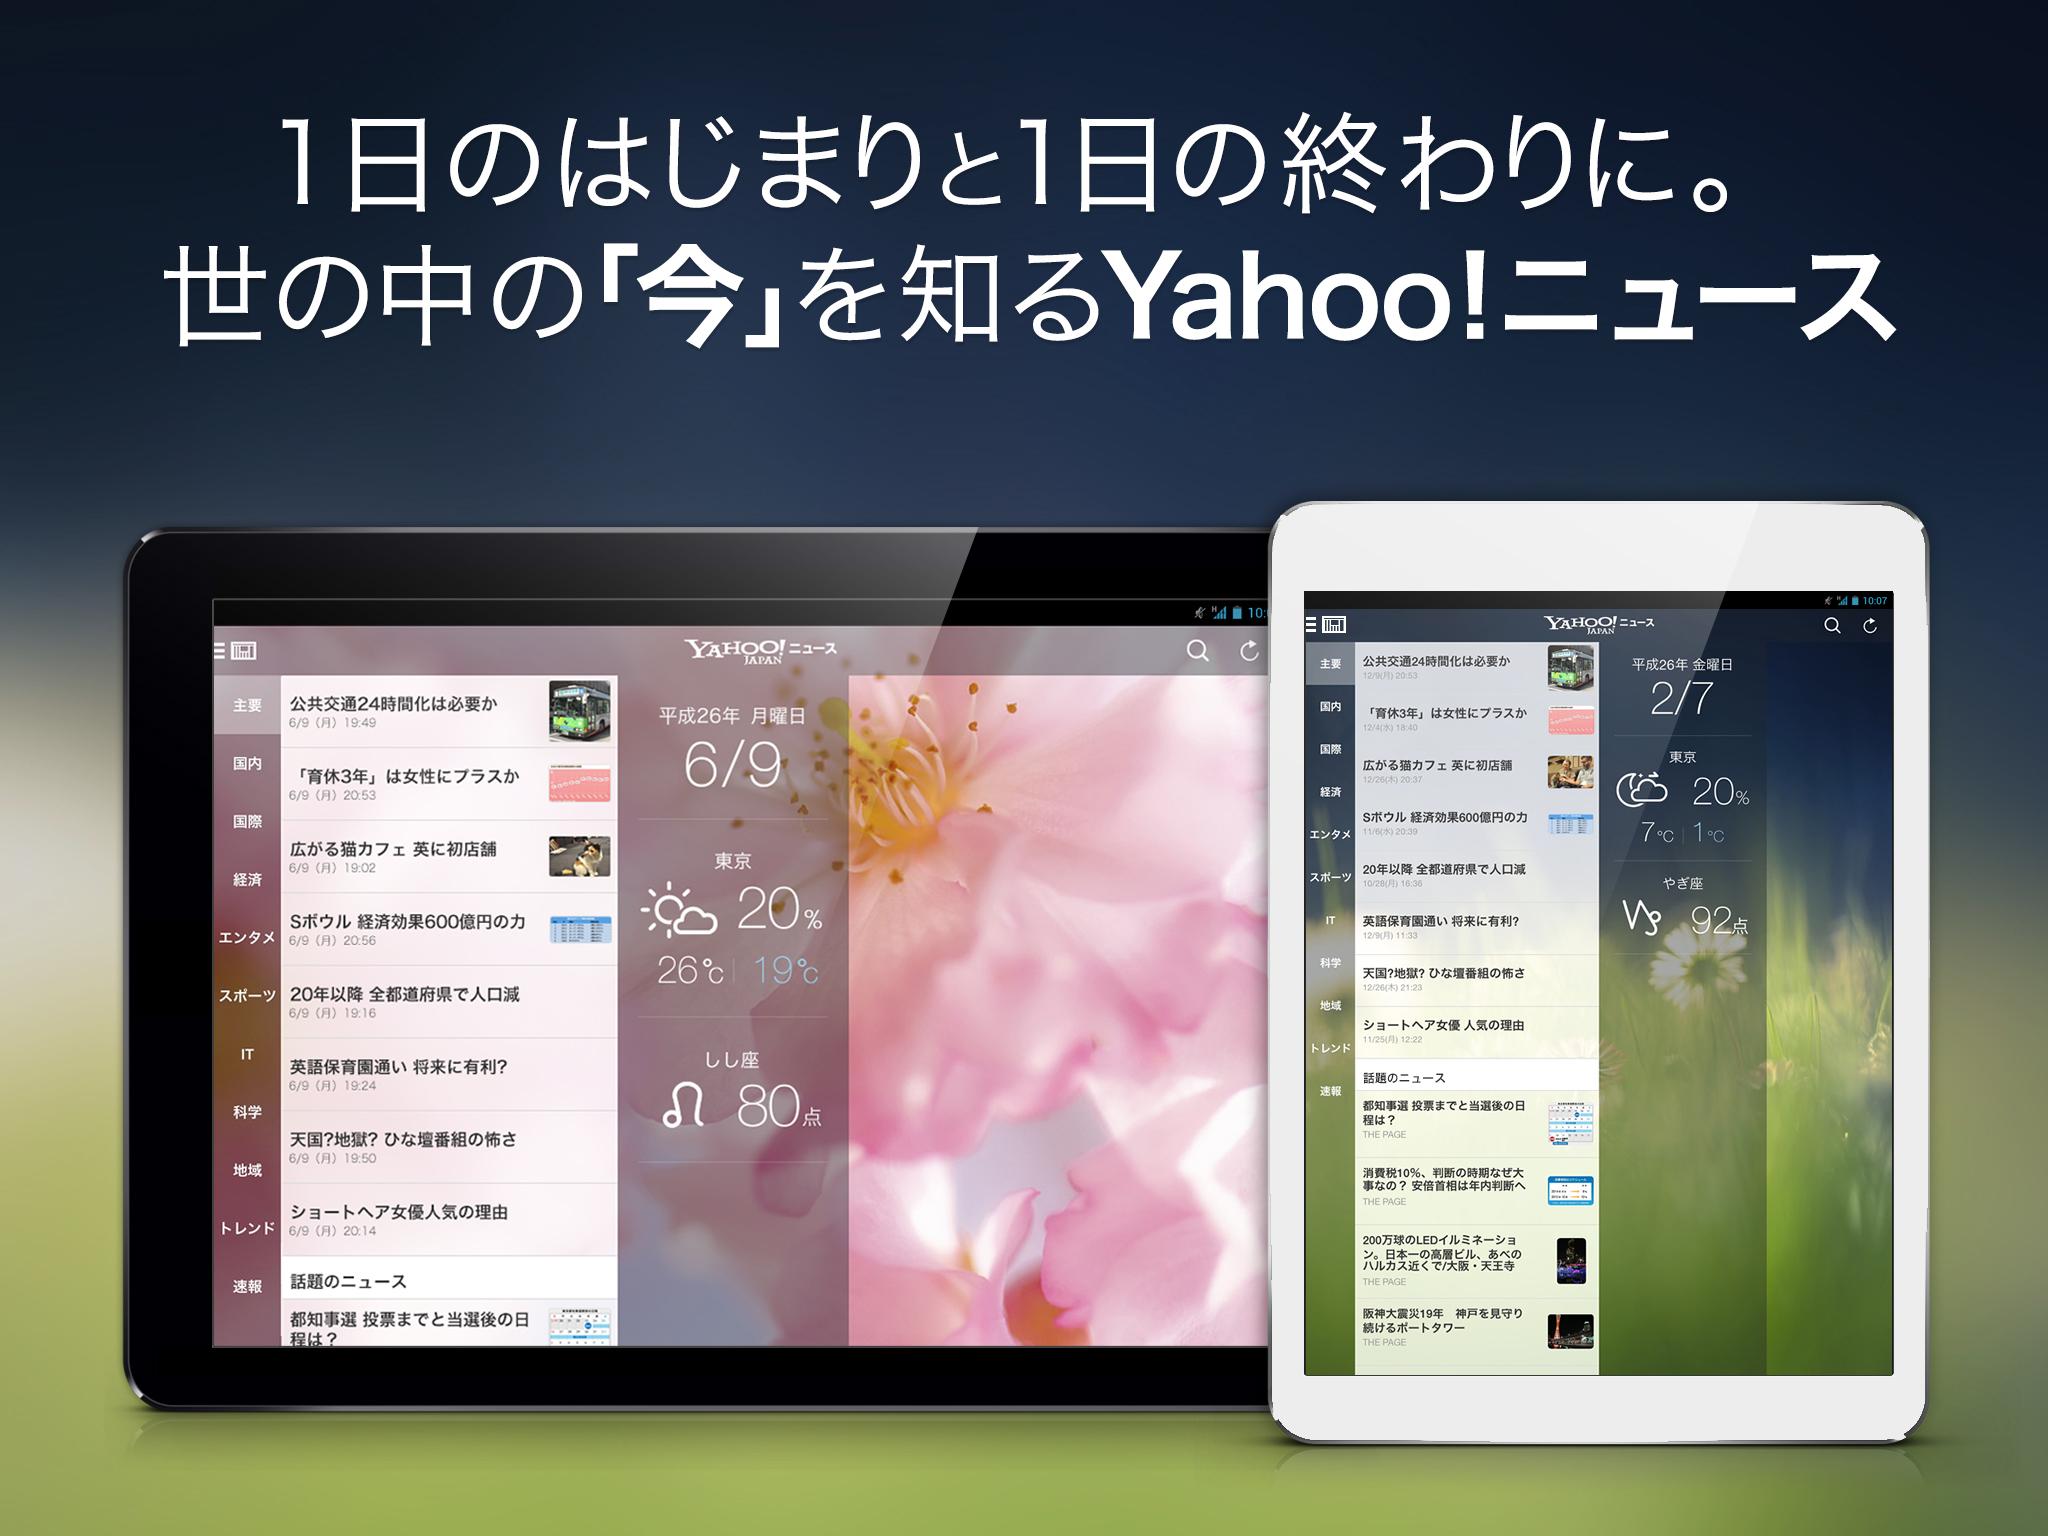 Android application Yahoo!ニュース for Tablet screenshort